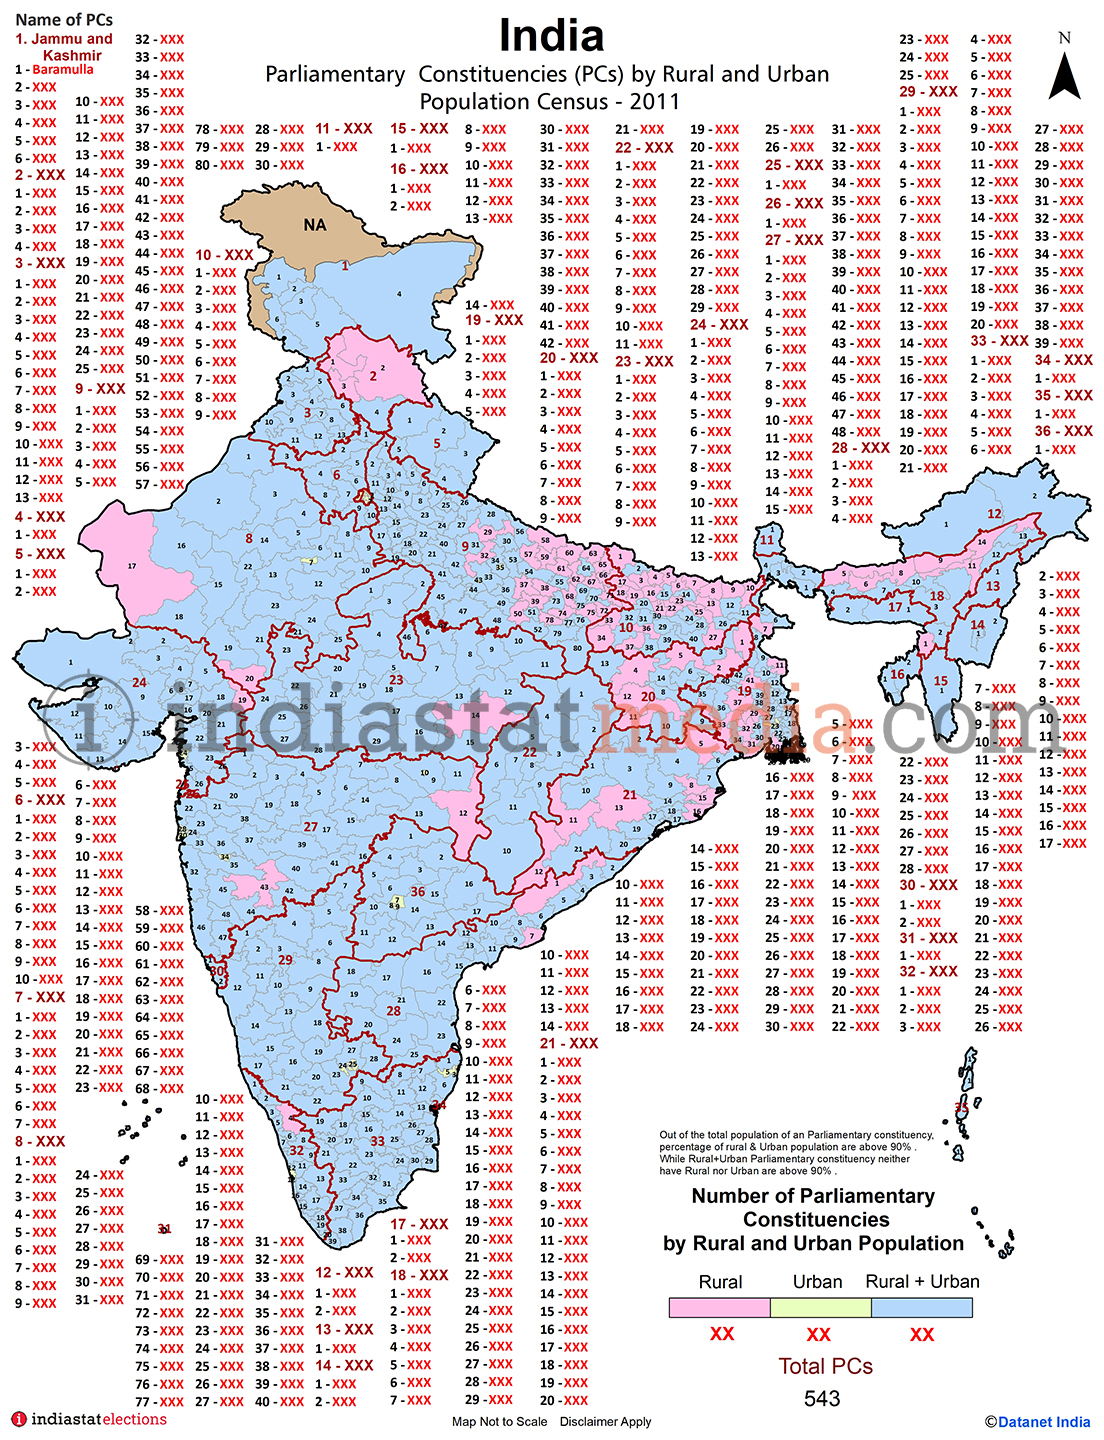 Parliamentary Constituencies by Rural and Urban Population in India  - Census 2011